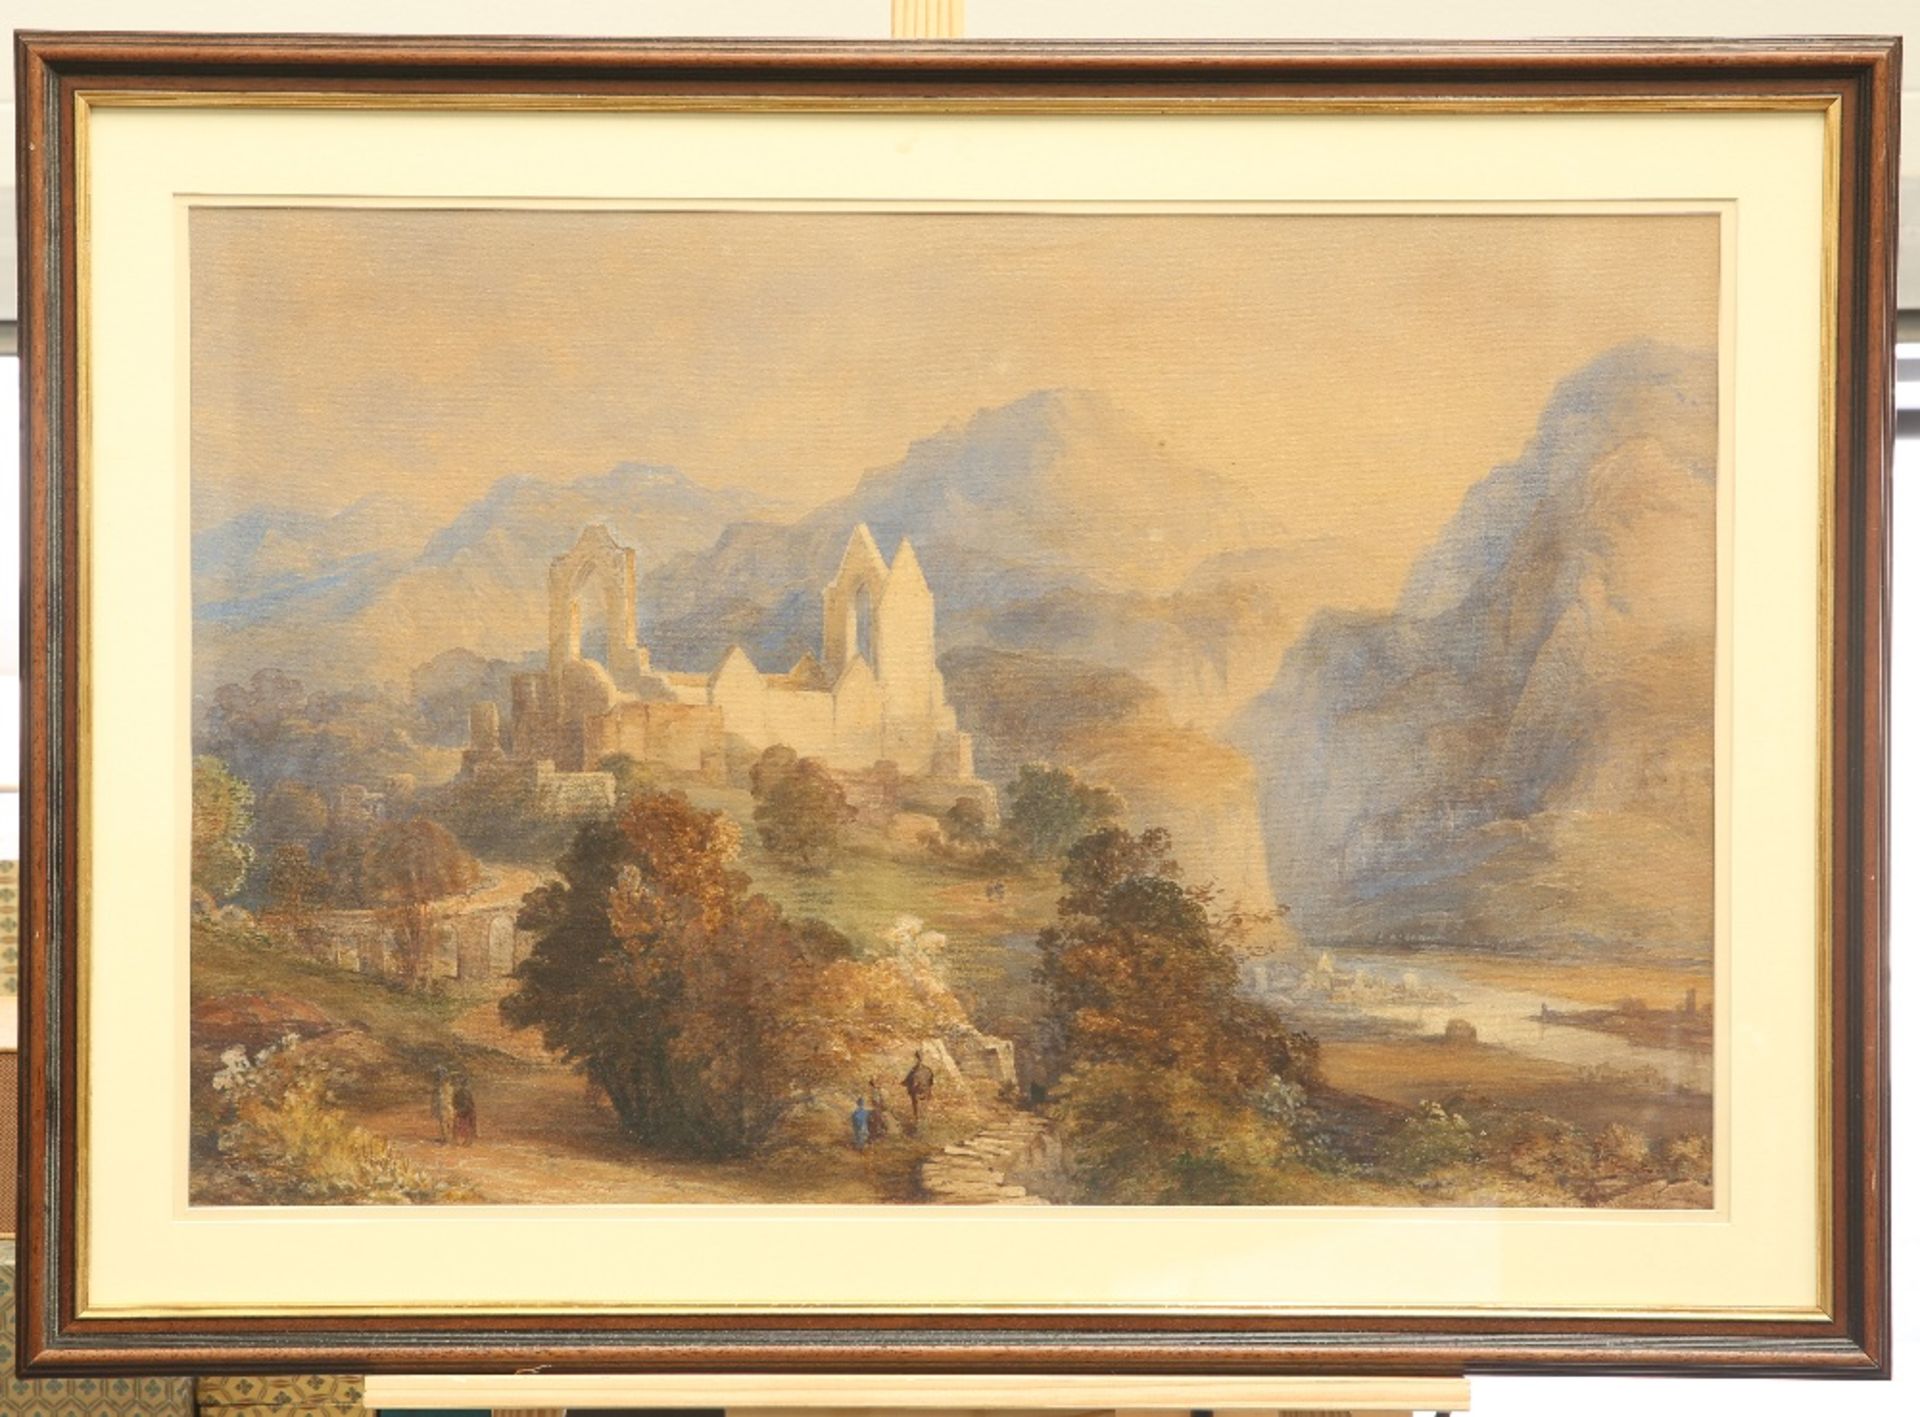 ENGLISH SCHOOL (19TH CENTURY), FIGURES AND RUINS IN A LANDSCAPE - Image 2 of 2